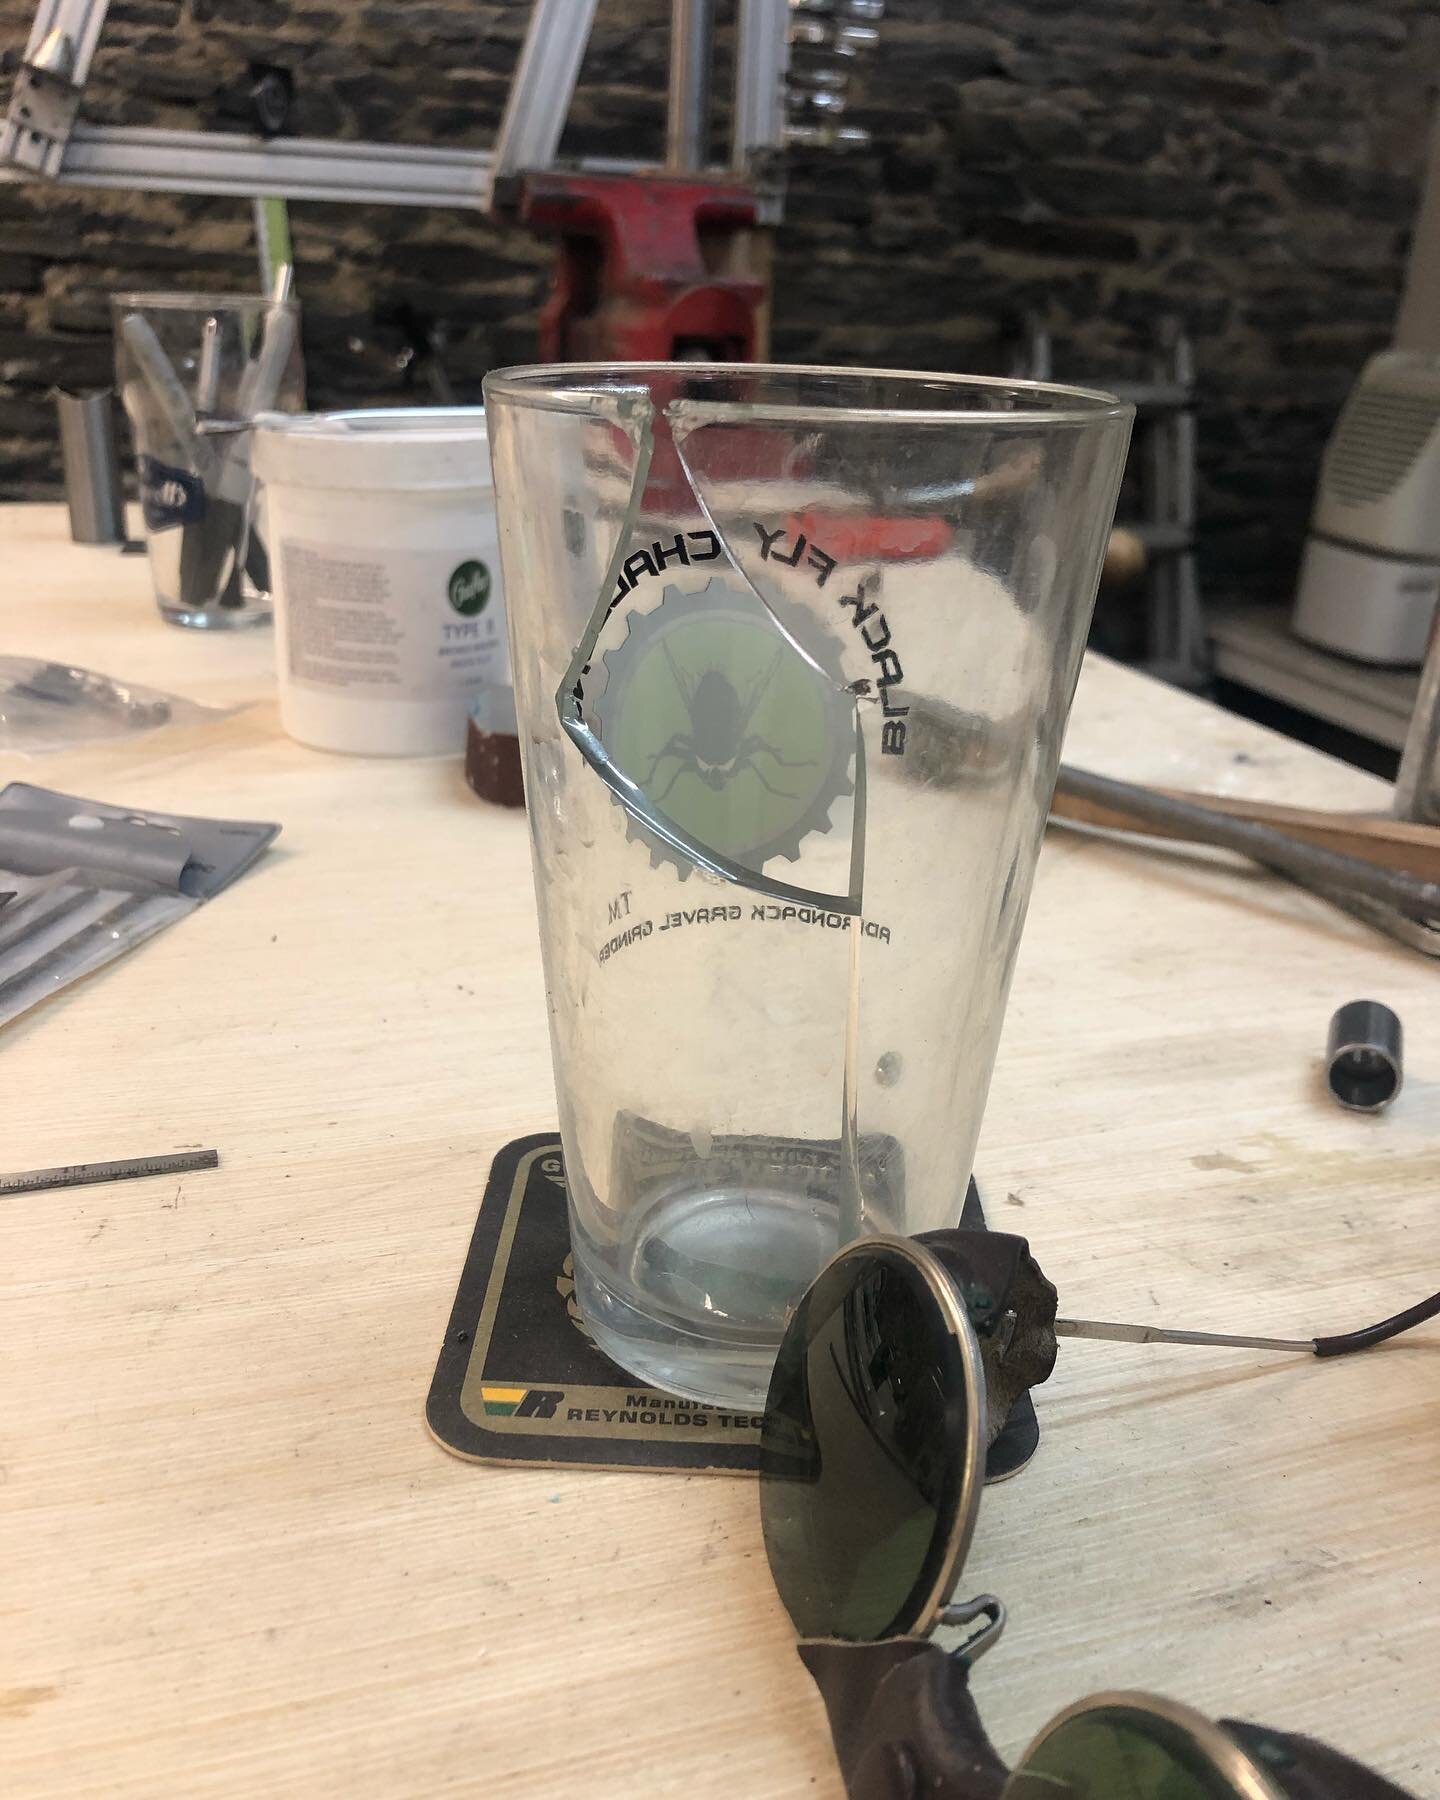 I knew it did not feel good, aside from obvious, when washing beer glasses at the shop and this happened. Bad omen. Another broken @blackflychallenge pint another year canceled. Nuts! See ya next year on the second Saturday in June. One week after Th